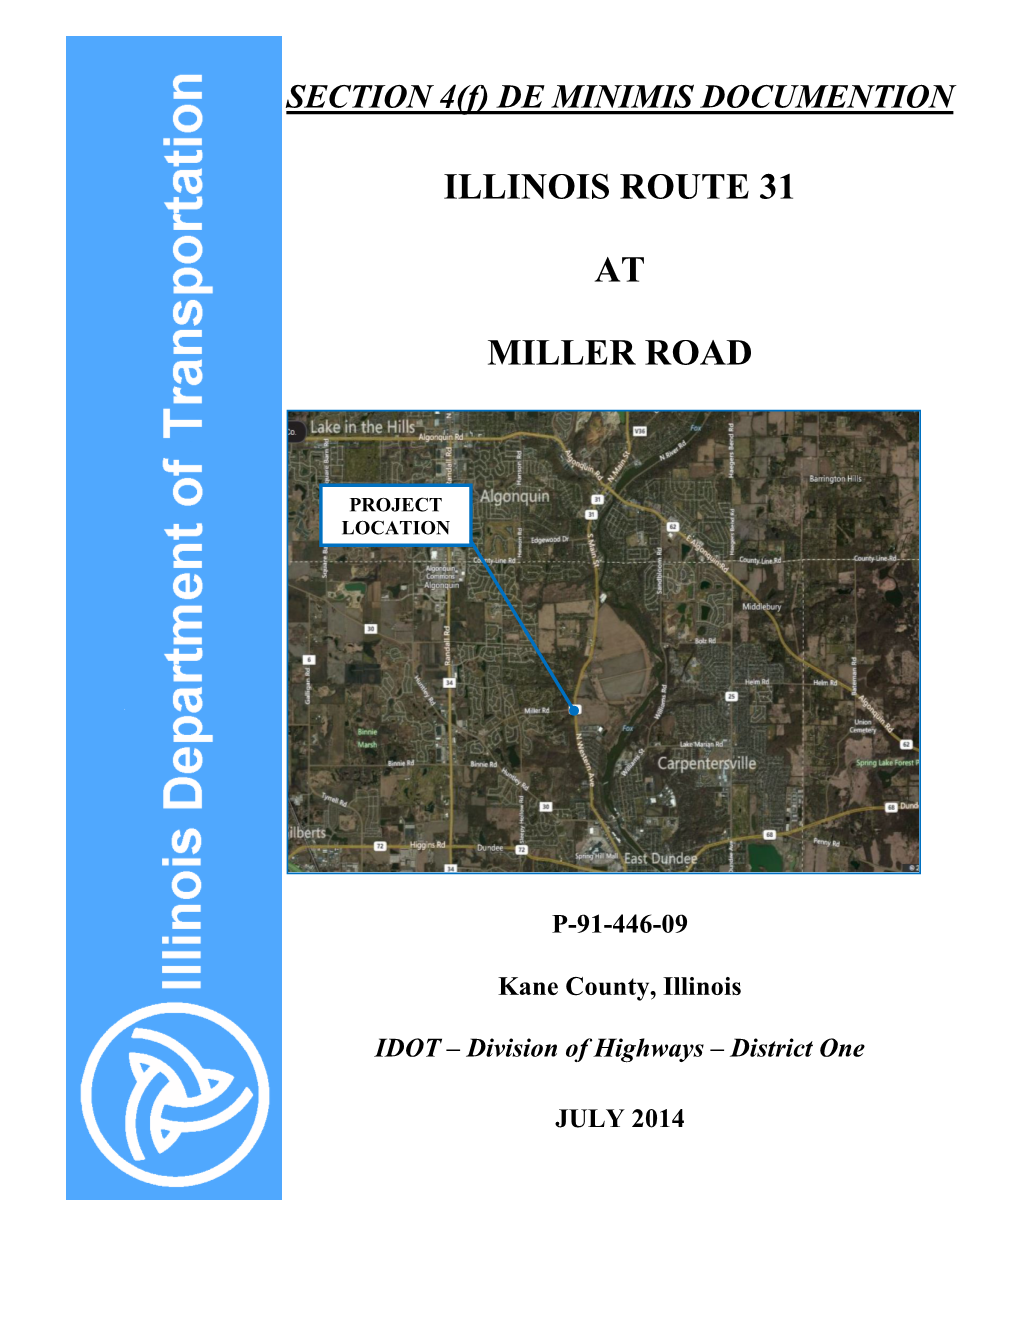 Illinois Route 31 at Miller Road Kane County P- 91-446-09